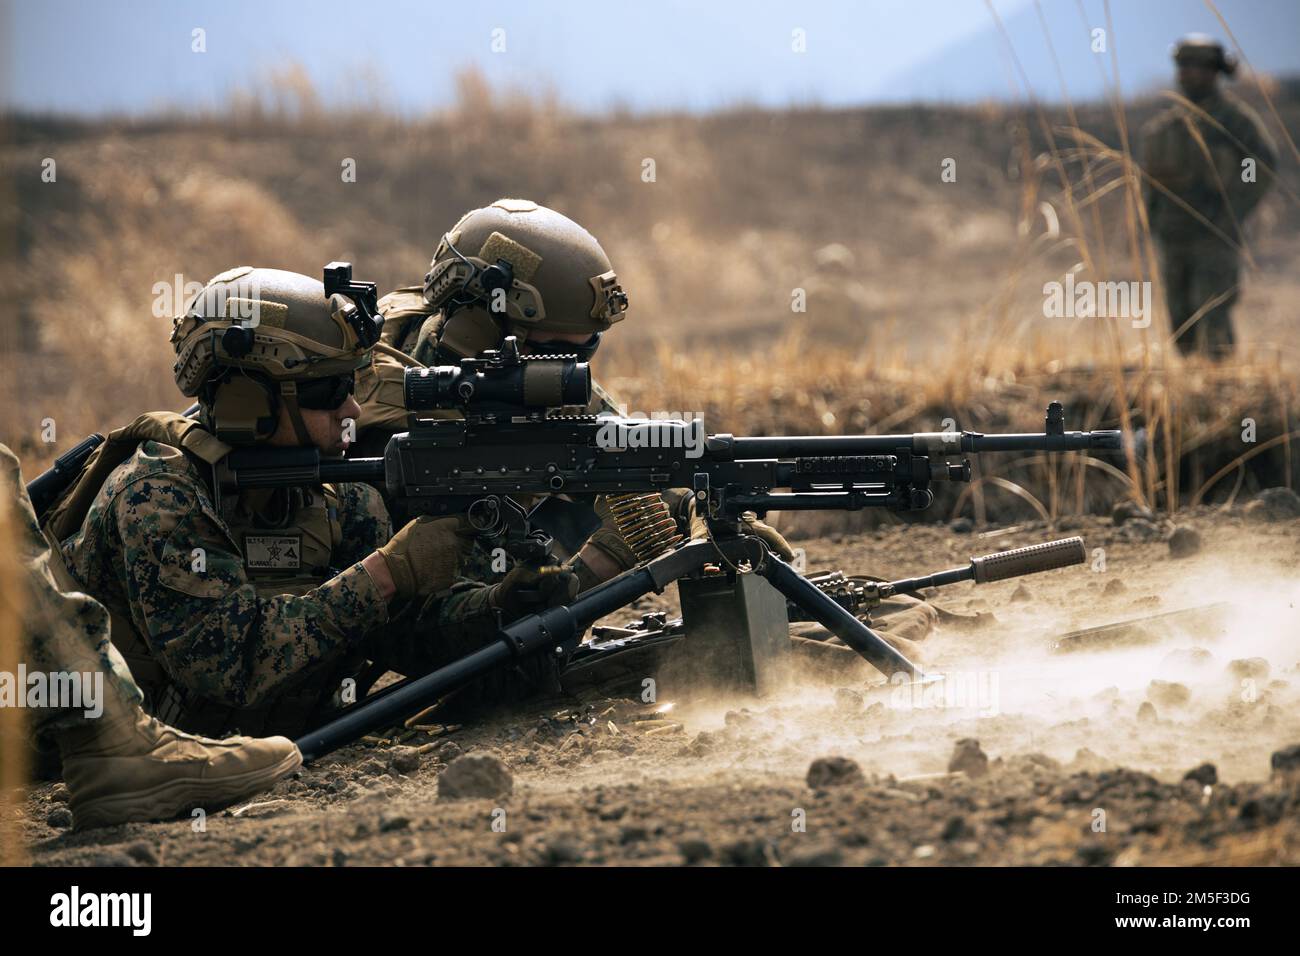 U.S. Marines with Battalion Landing Team 1/5, 31st Marine Expeditionary Unit, fire an M240B machine gun during a live-fire exercise on Combined Arms Training Center Camp Fuji, Shizuoka Prefecture, Japan, Mar. 11, 2022. Live-fire drills and exercises keep Marines consistent in the execution of their roles within their squads. Maritime Defense Exercise Amphibious Rapid Deployment Brigade is a bilateral exercise meant to increase interoperability and strengthen ties between U.S. and Japanese forces for the defense of Japan. Stock Photo